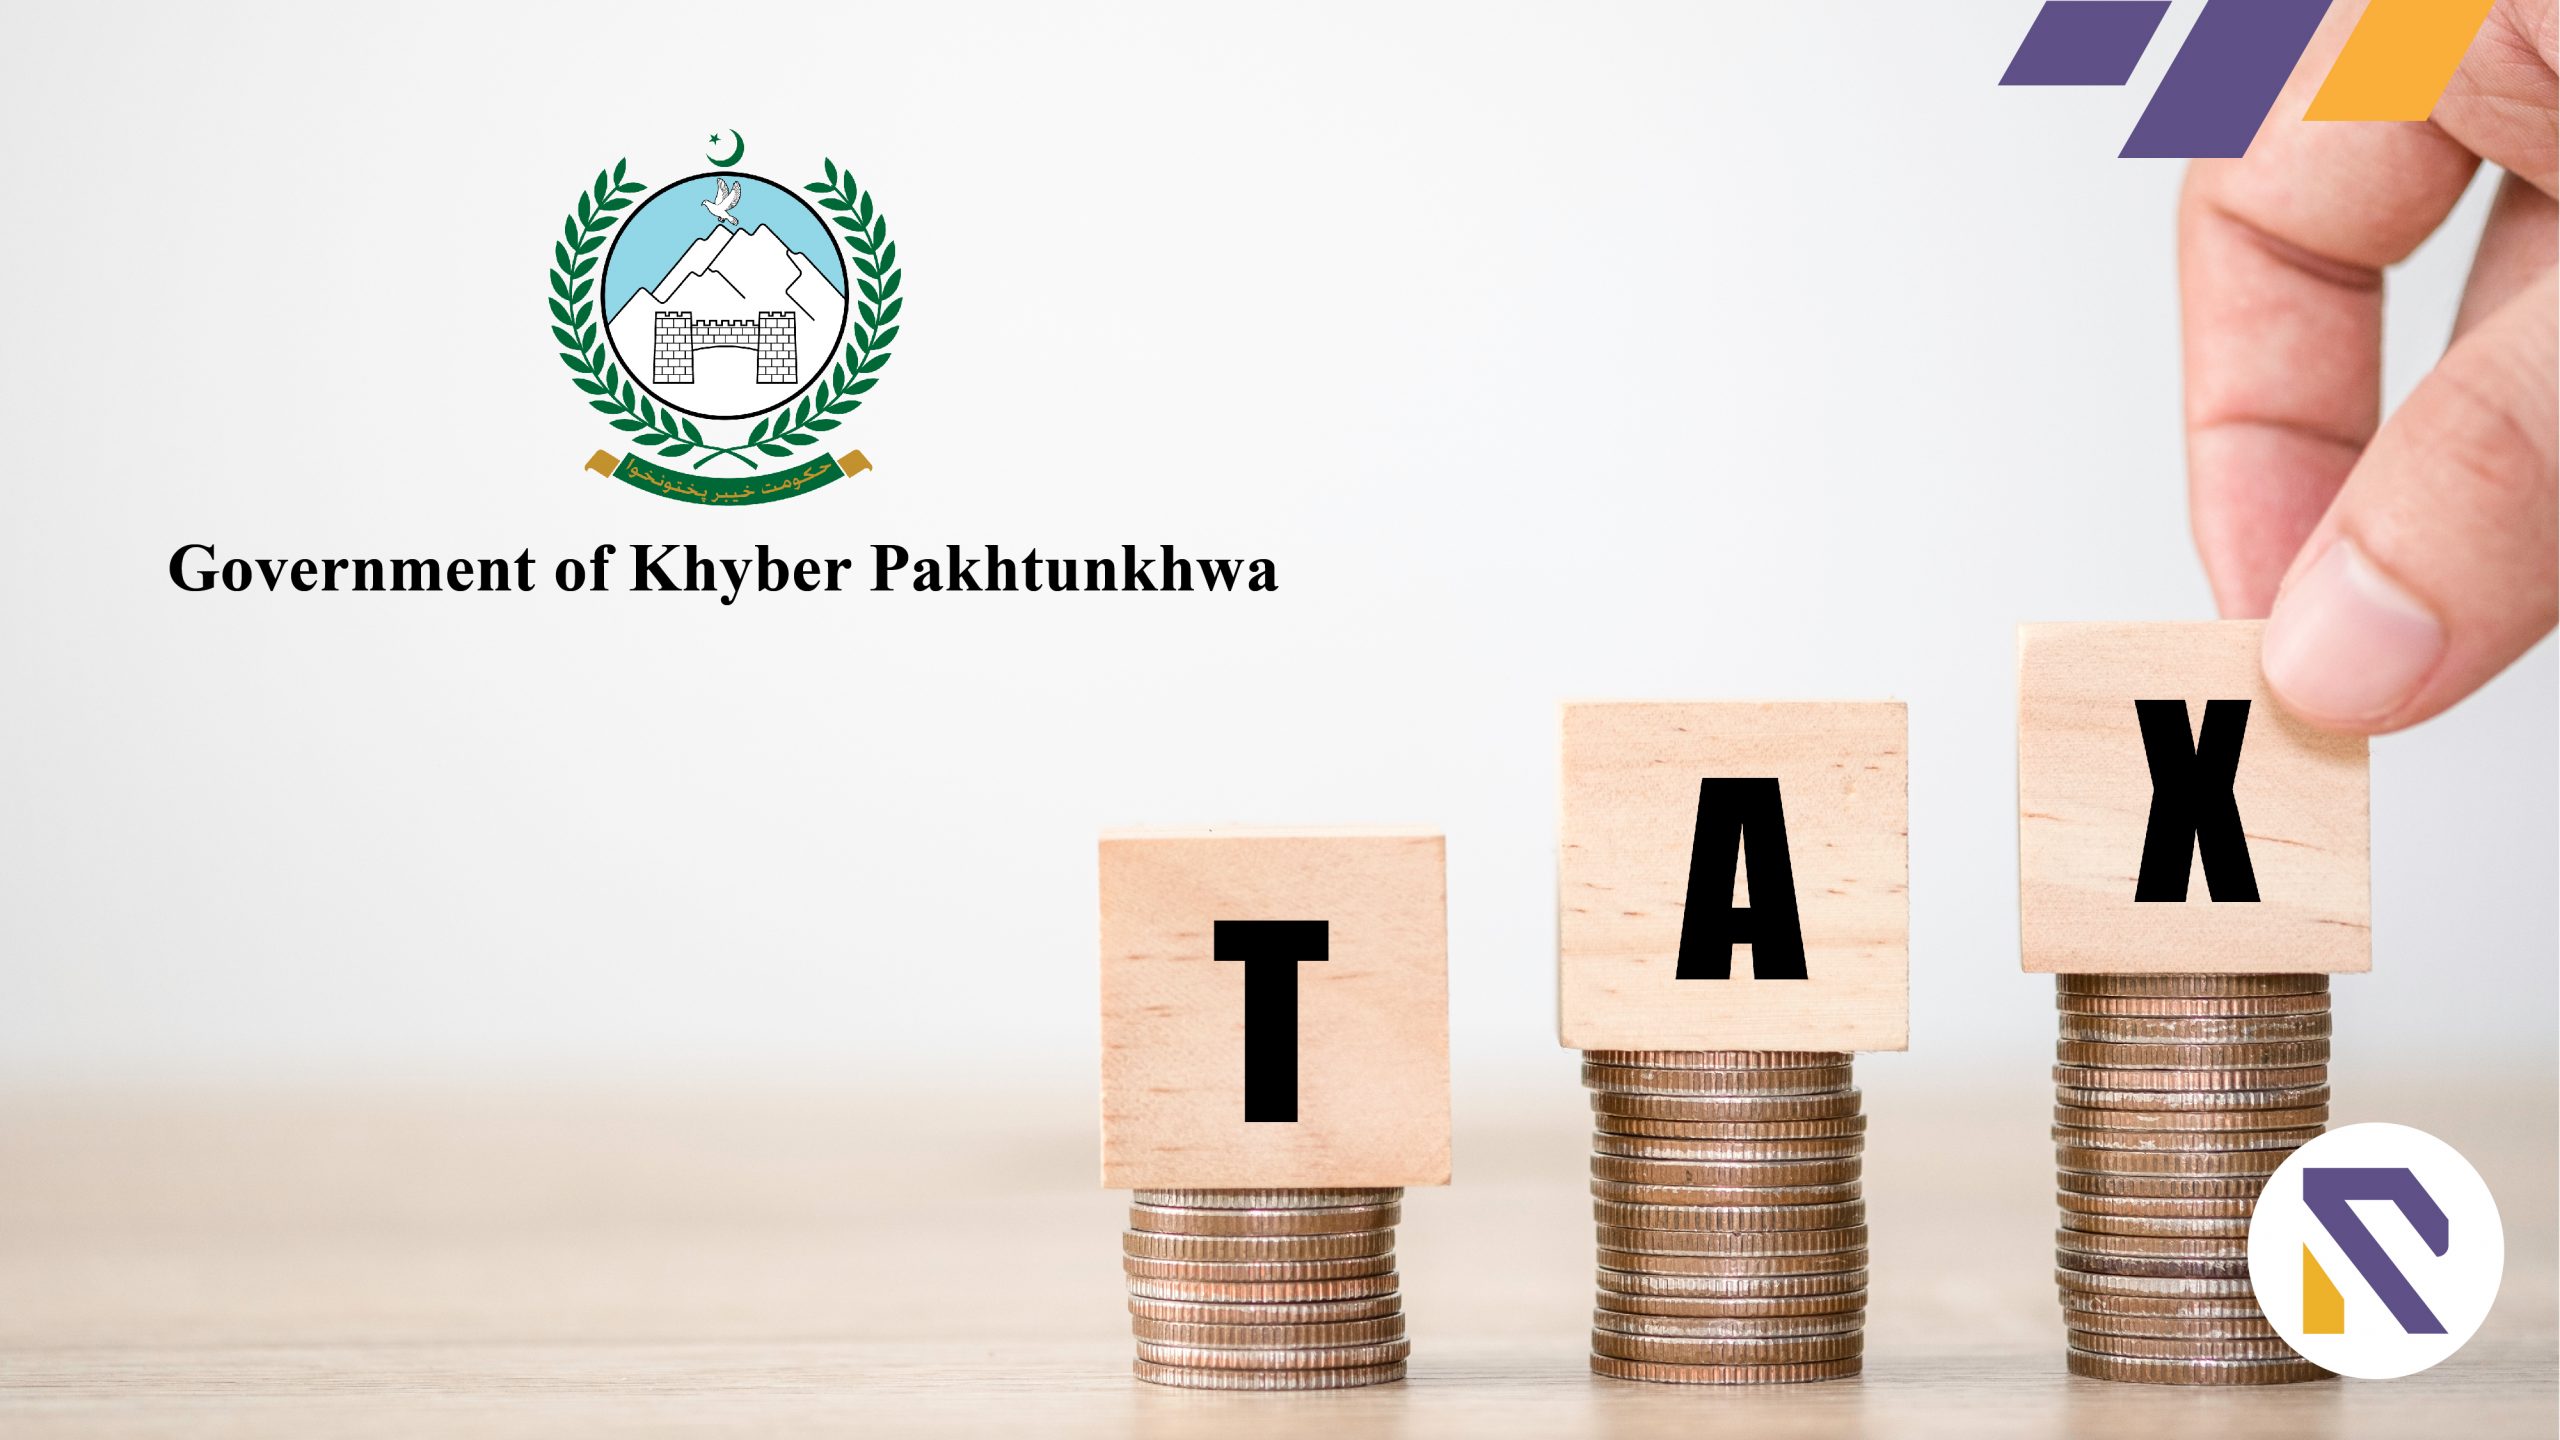 Real Estate Agents in KPK Seeks Government Action on Tax Rate Revisions